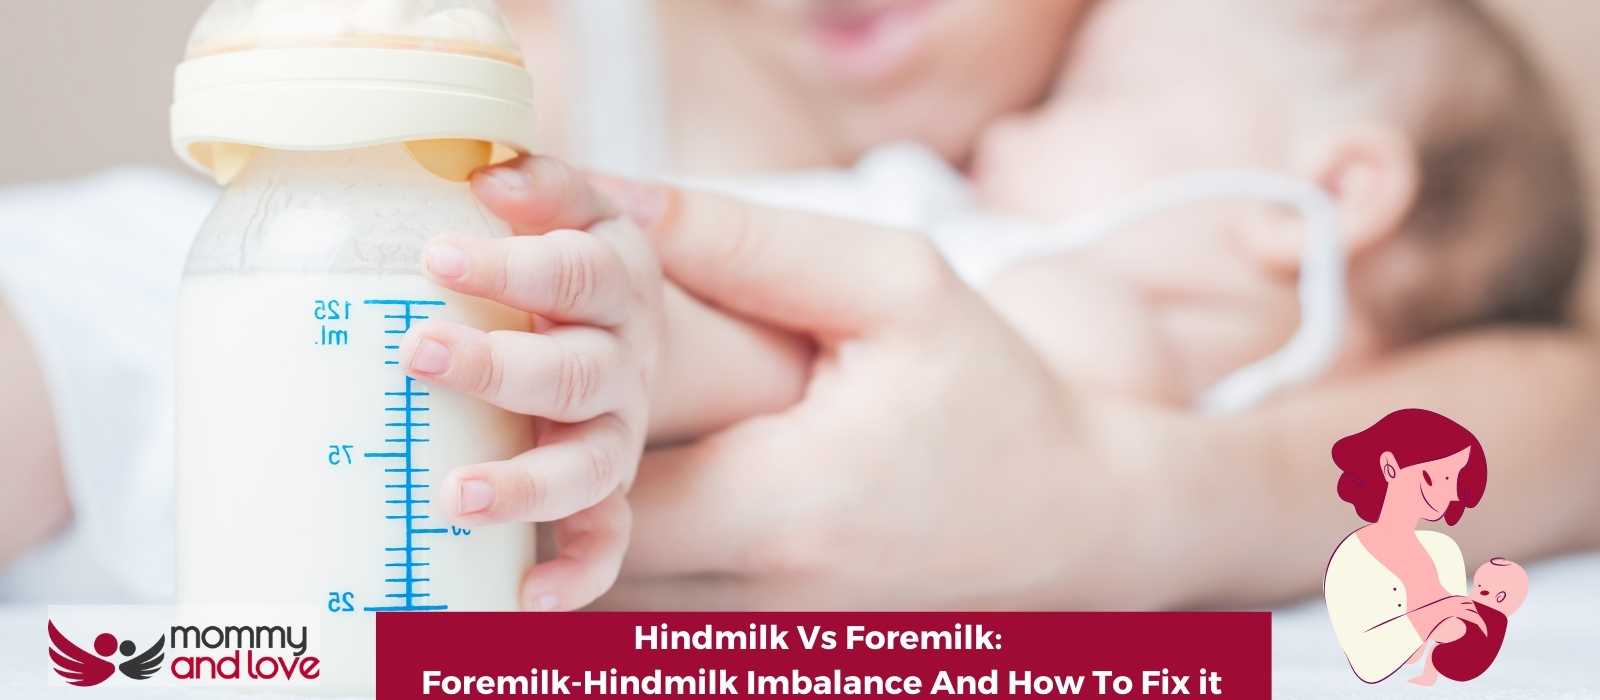 Hindmilk Vs Foremilk: Foremilk-Hindmilk Imbalance And How To Fix it